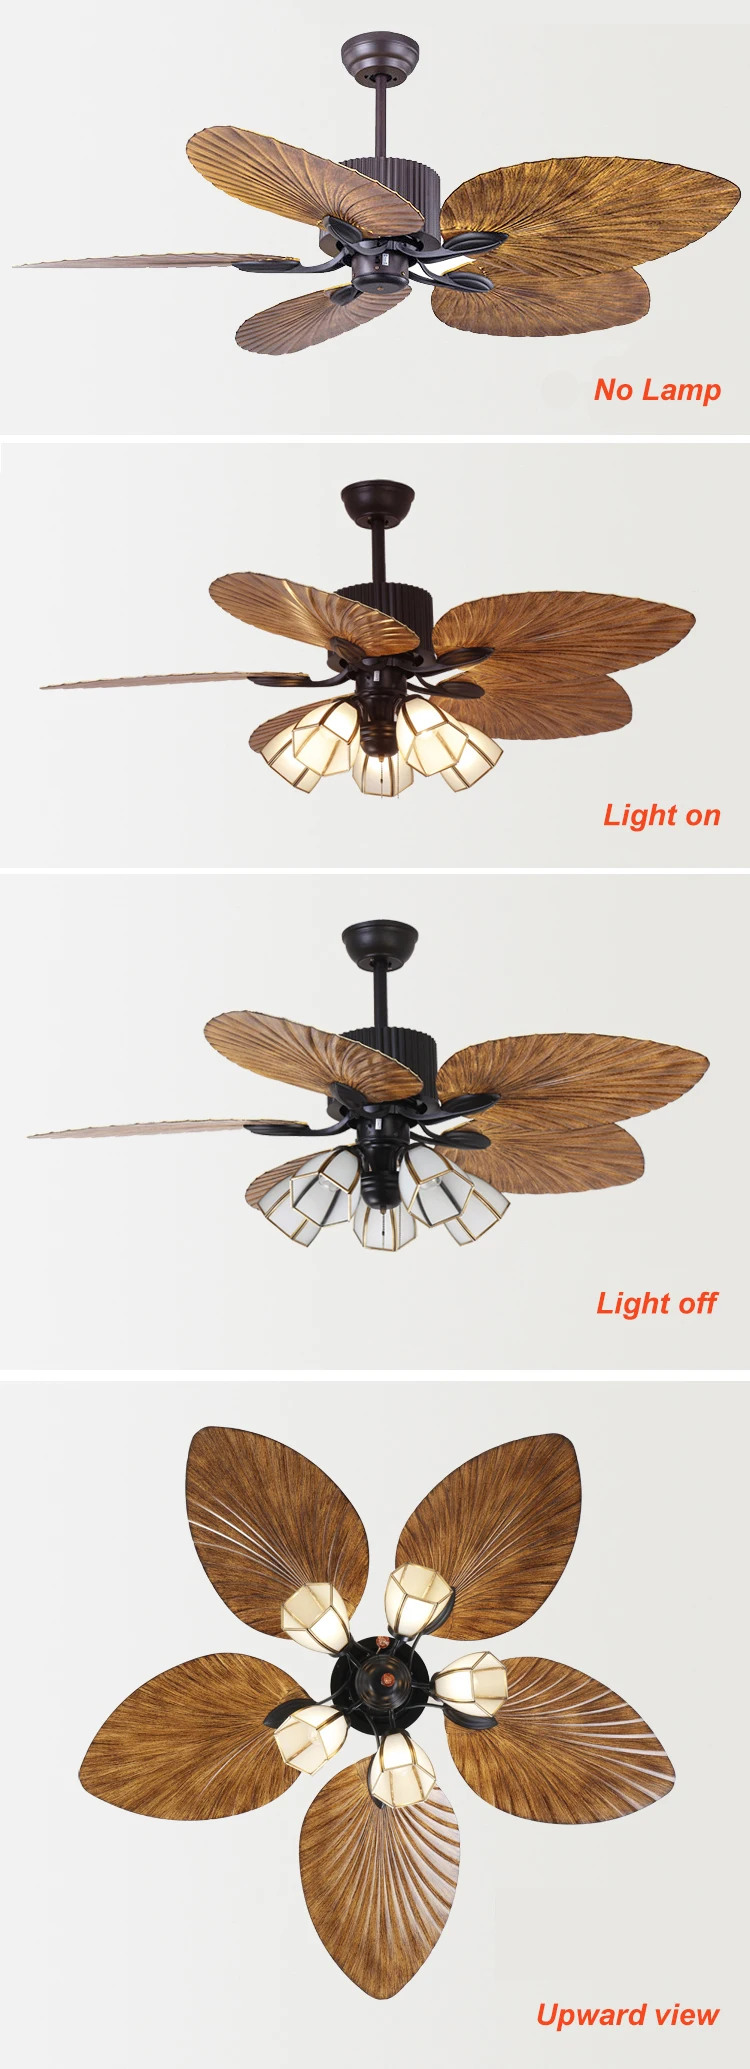 Modern Decorative Electric Motor Cooling Fan Rattan Ceiling Fan With Light And Remote View Rattan Fan Kbs Product Details From Shenzhen Kebaishi